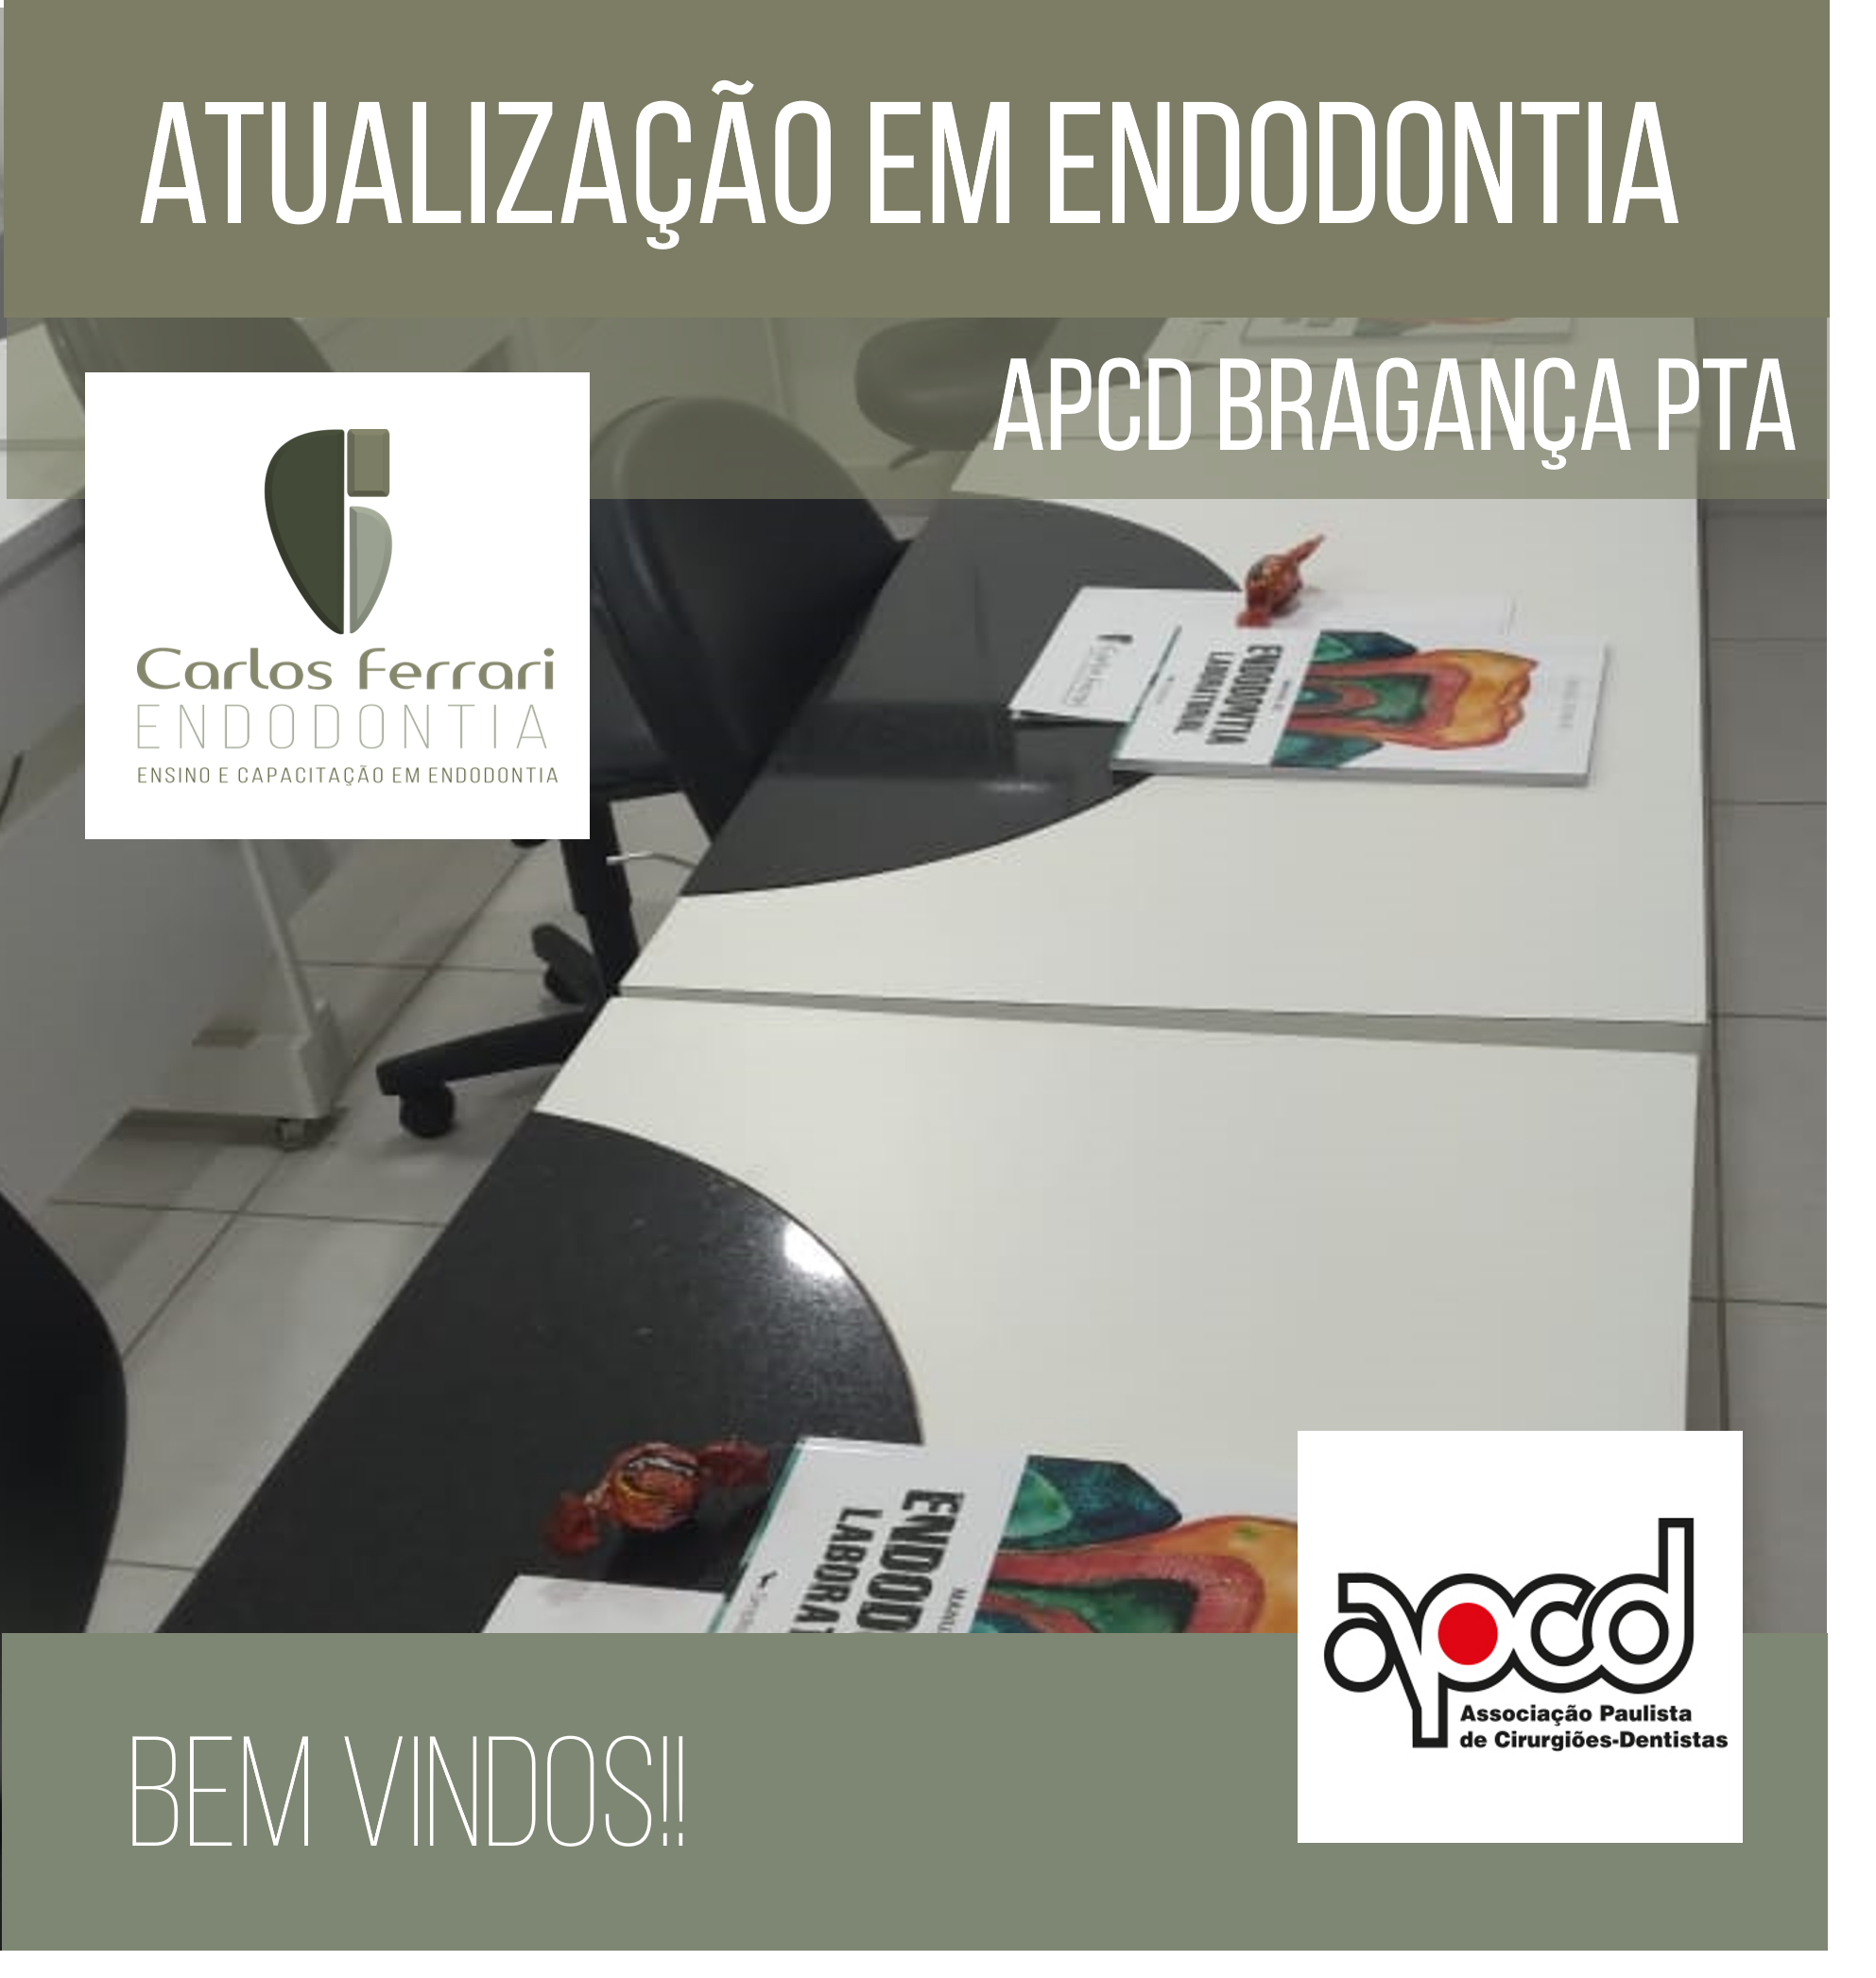 You are currently viewing Update in endodontics in Bragança Paulista